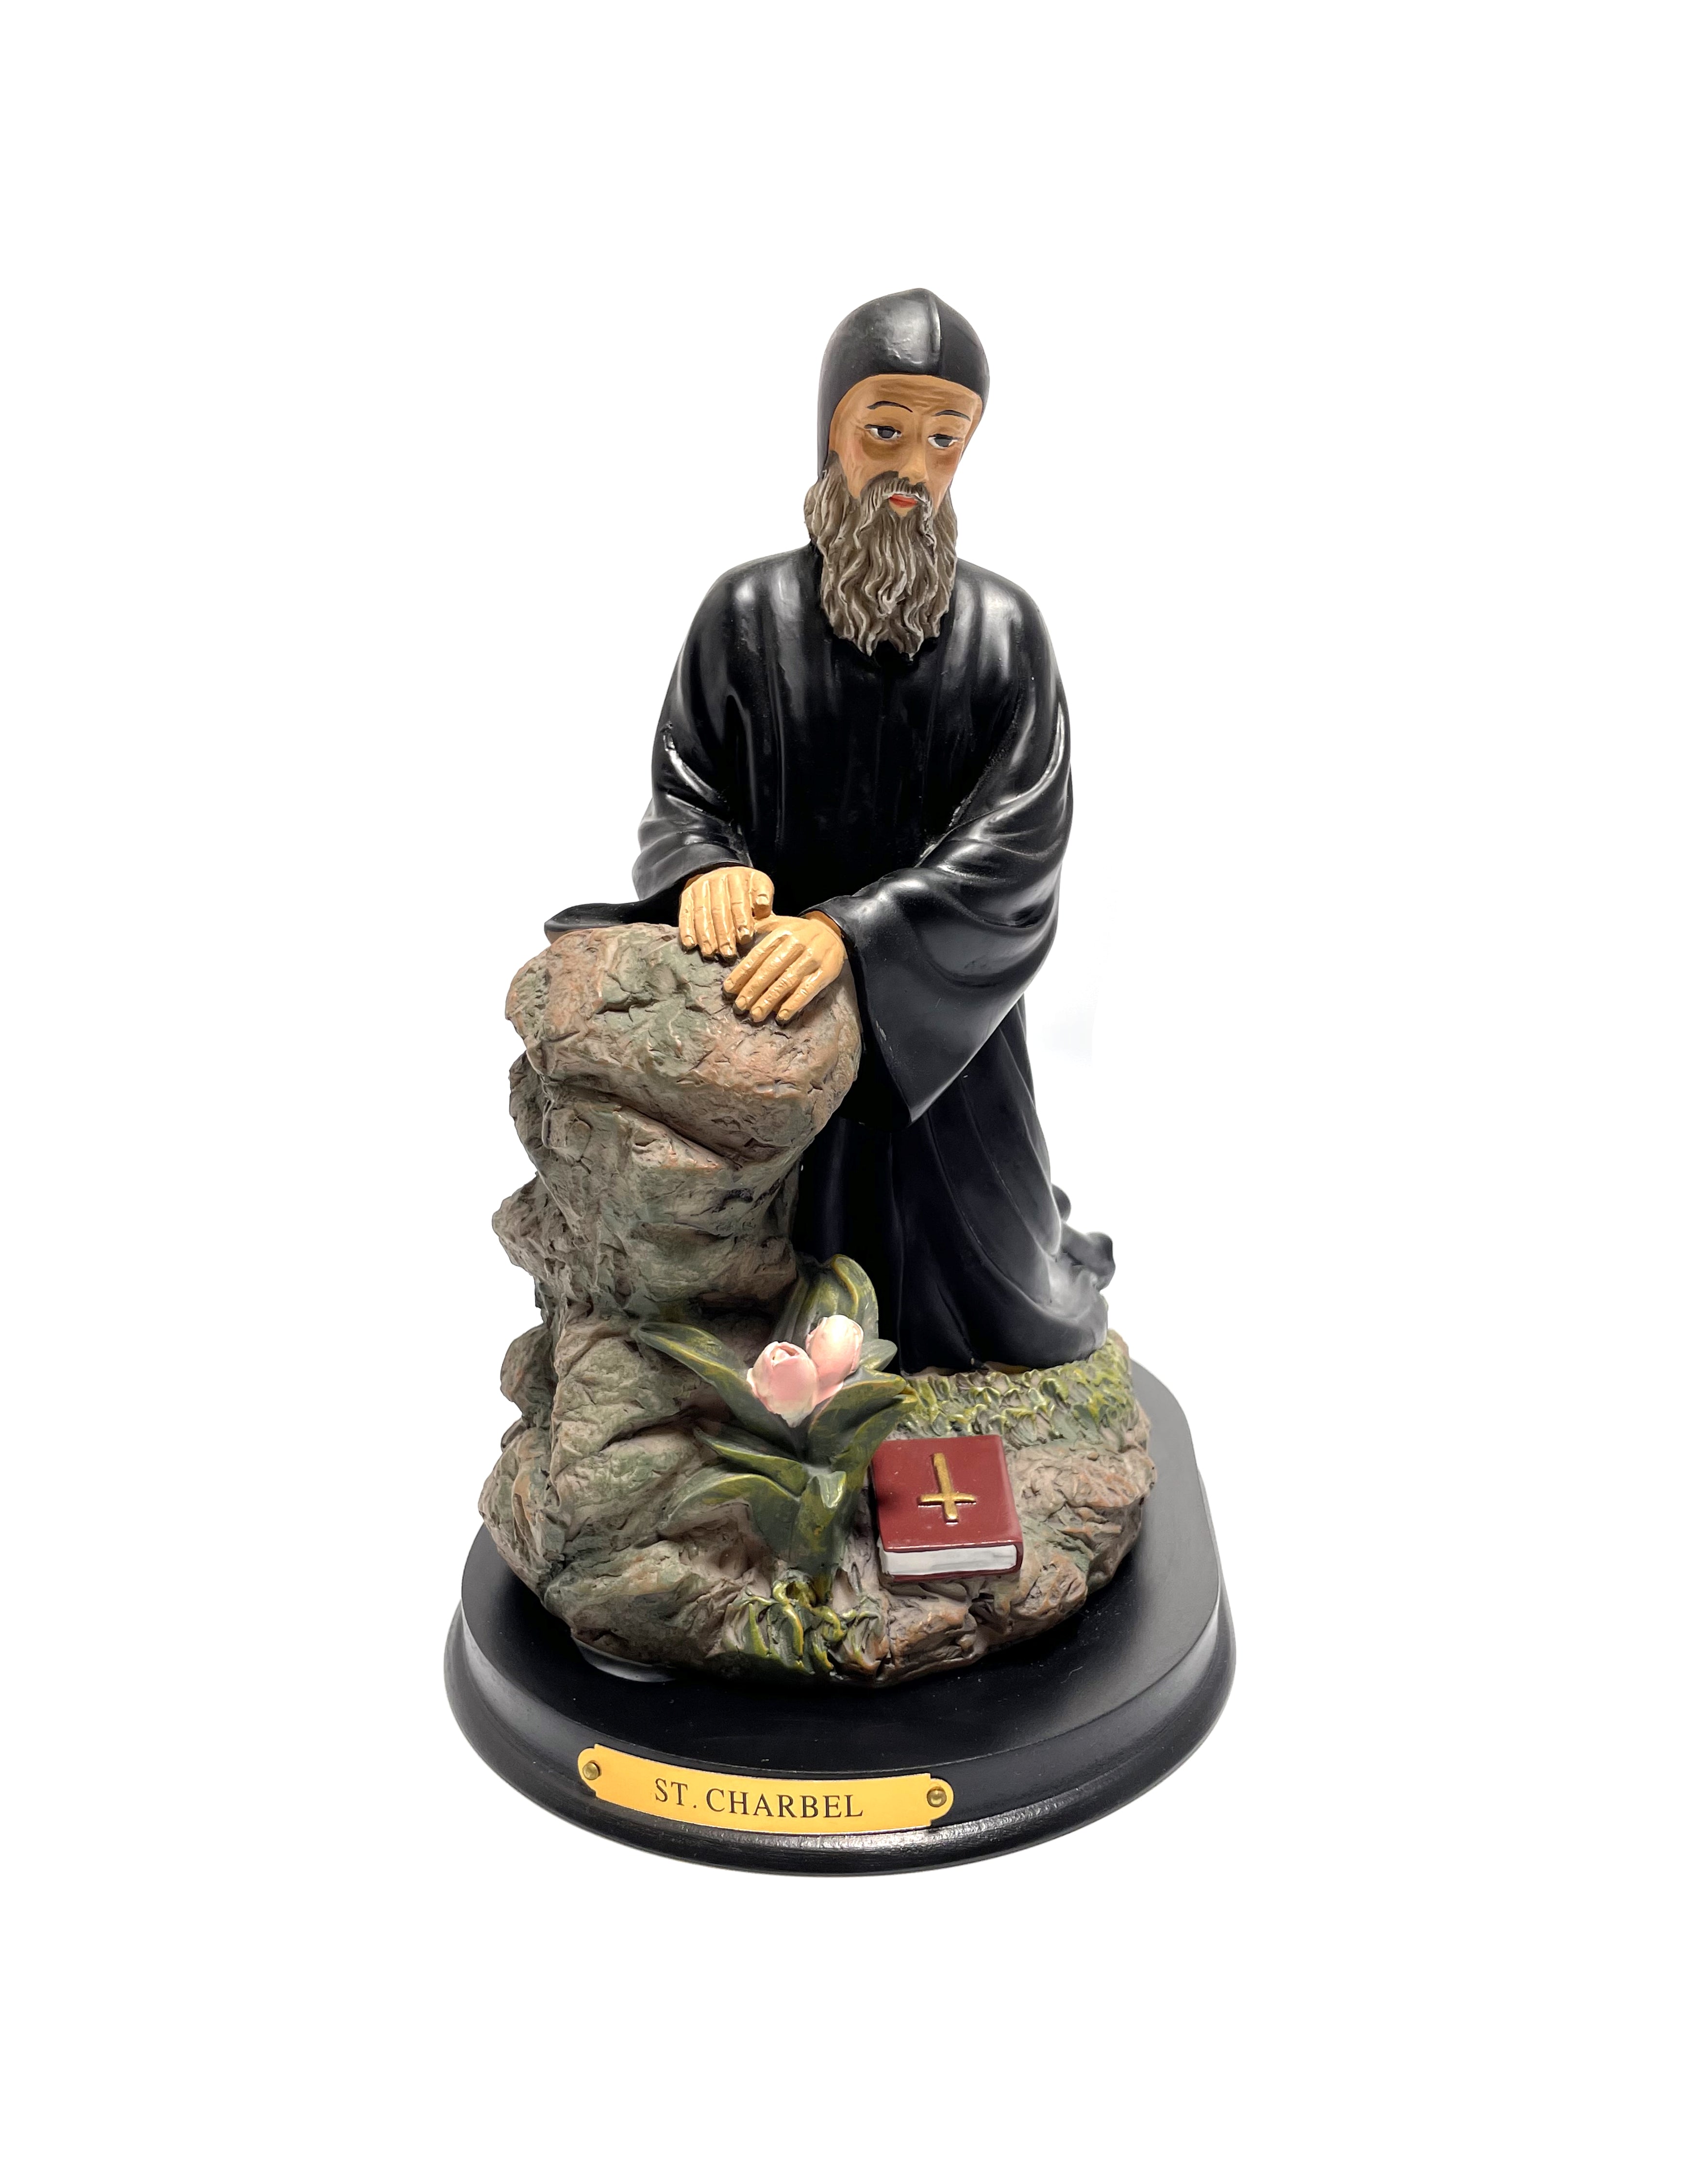 Religious statue of Saint Charbel 10" height